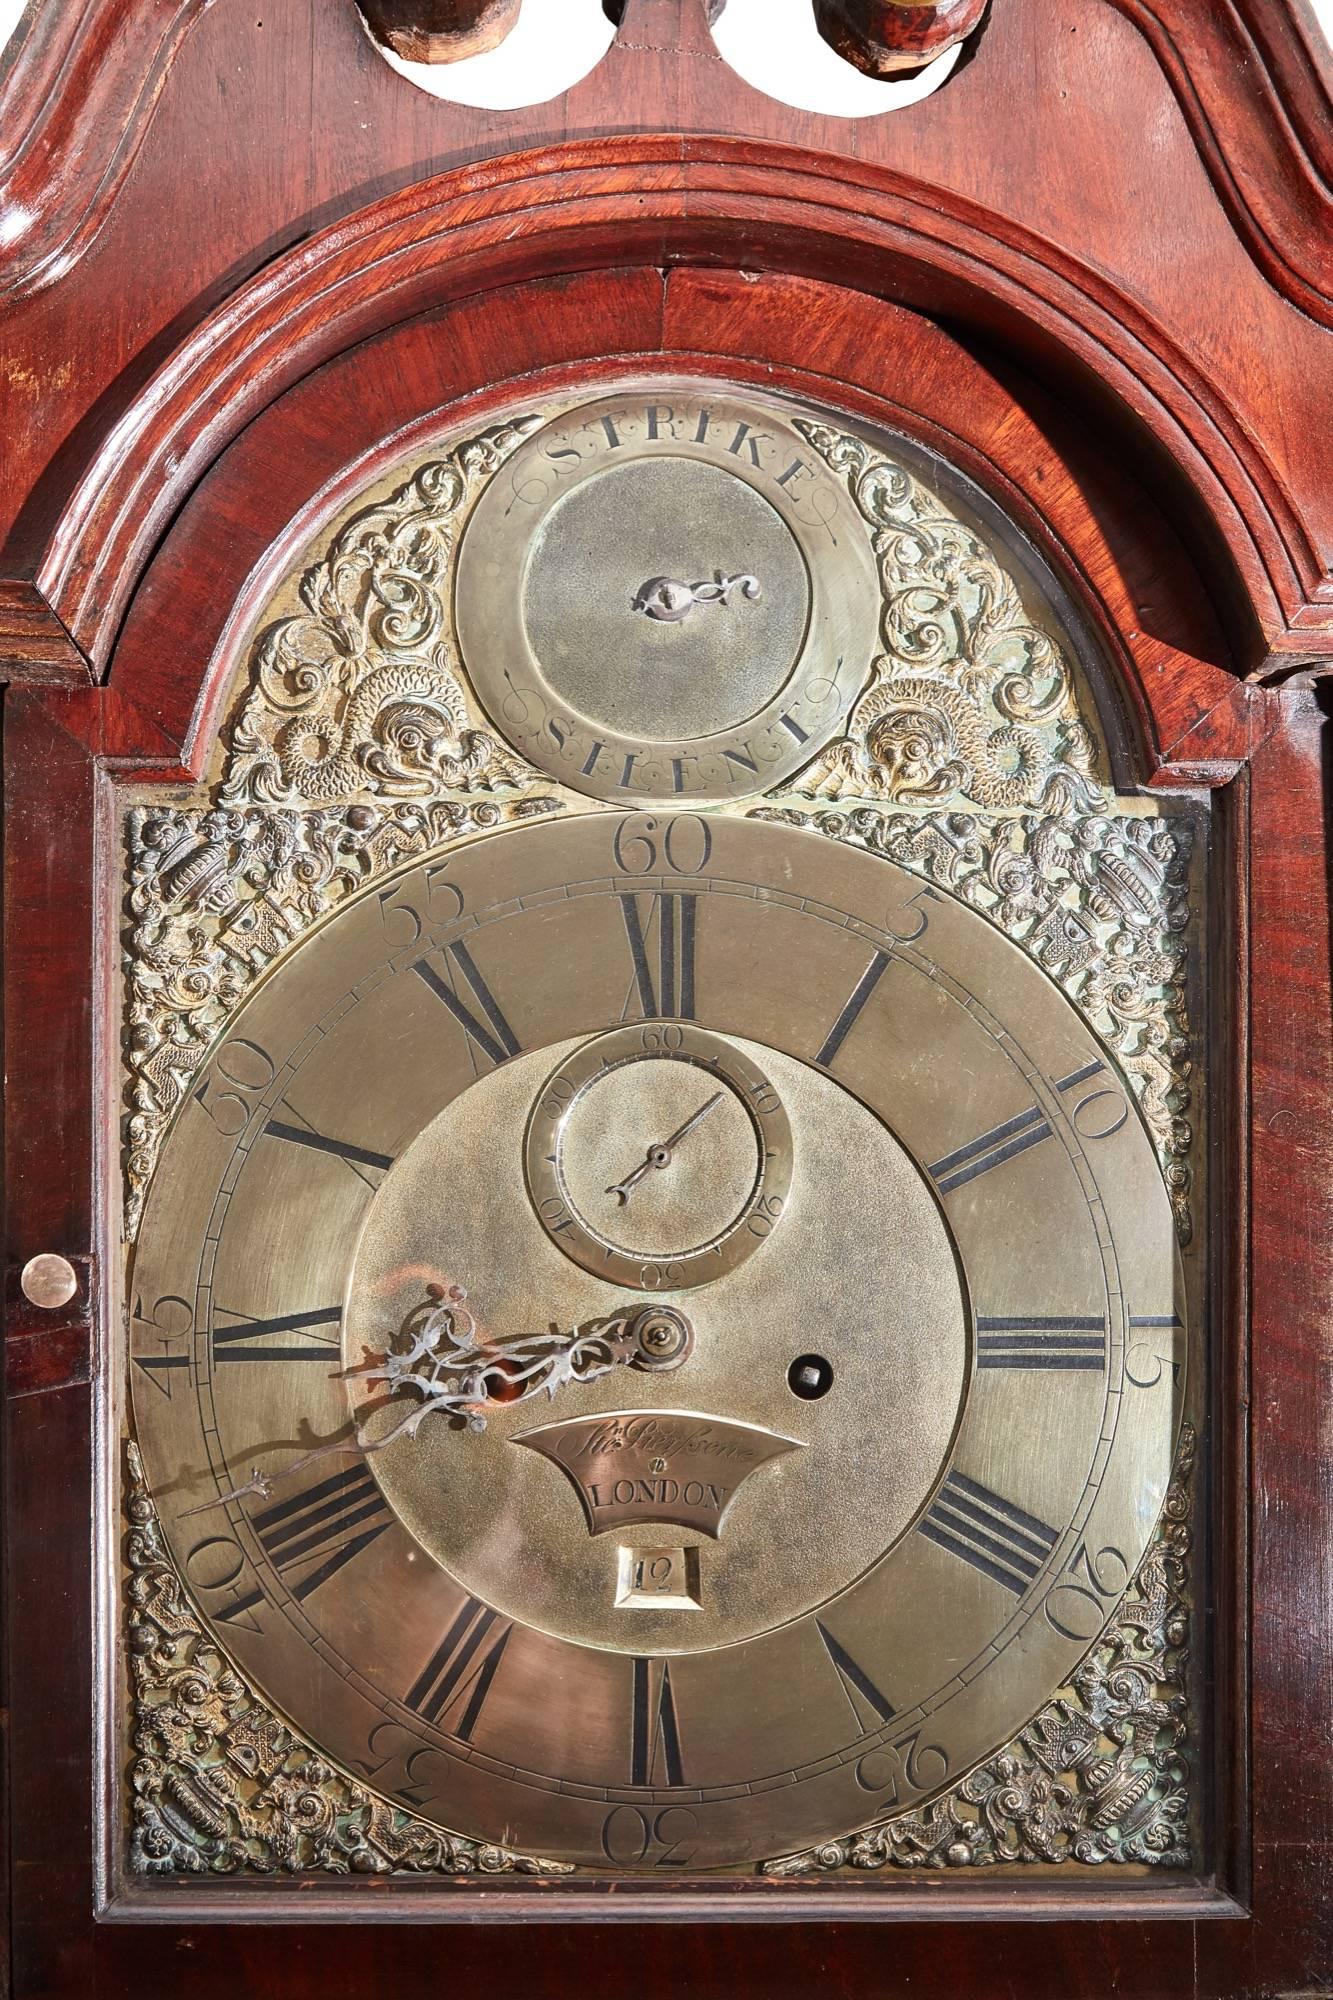 Mahogany inlaid brass face 8 day grandfather clock, ste'pierfsene London ,date 1760,with a swan-neck pediment original finial, reeded columns to the hood, the arched brass dial movement is of typical London manufacture being five pillar construction